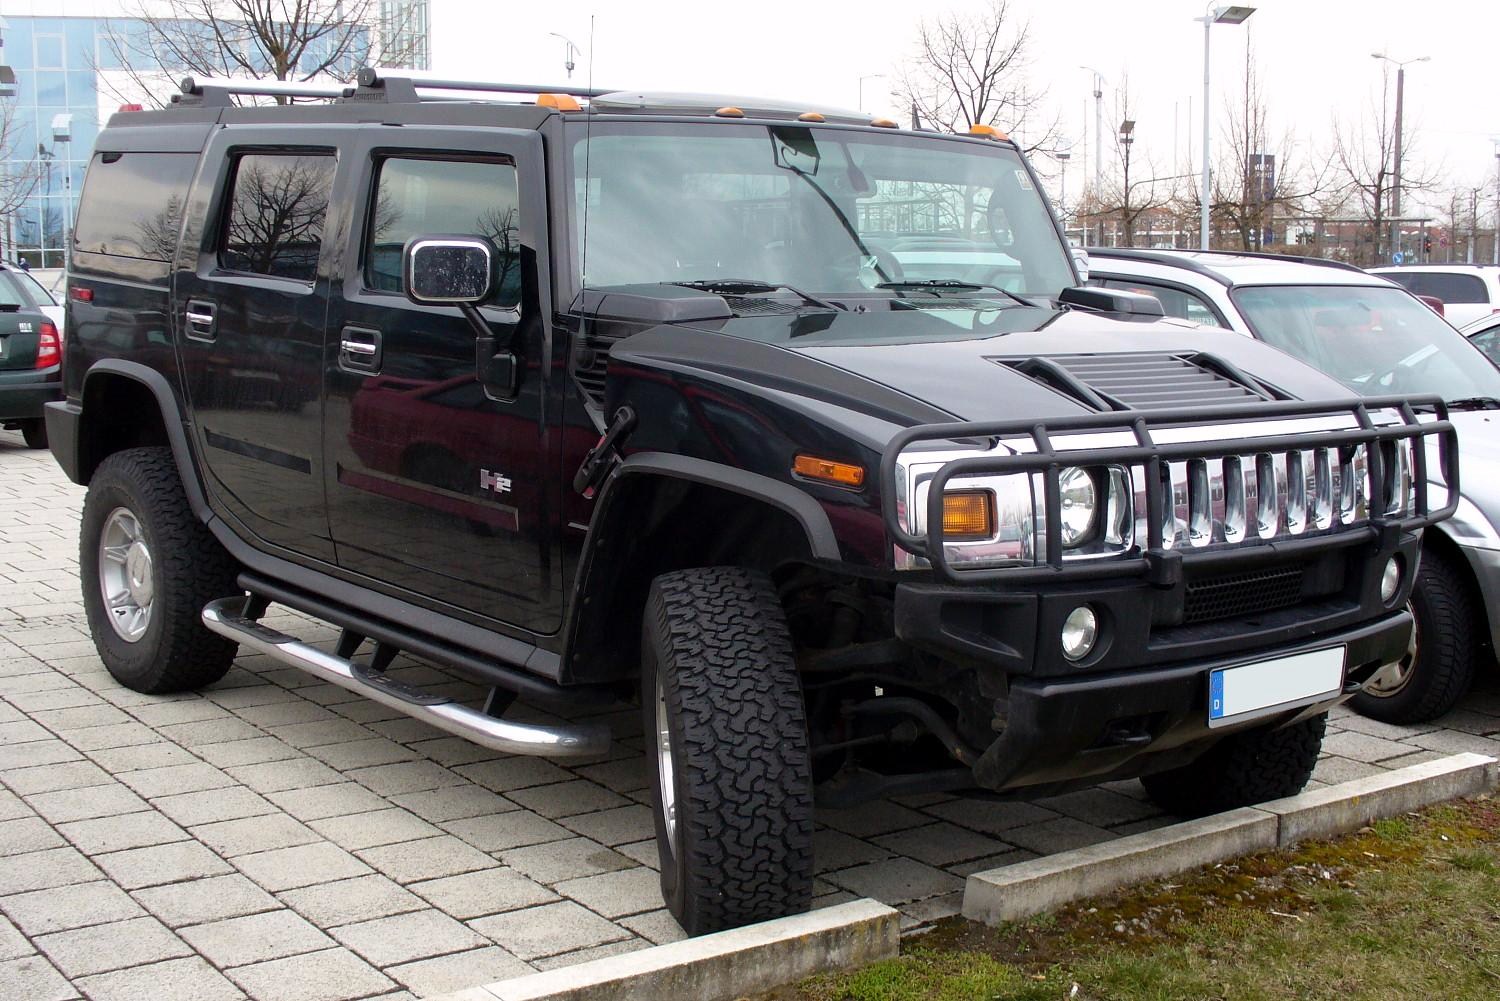 Amazing Hummer H2 Pictures & Backgrounds